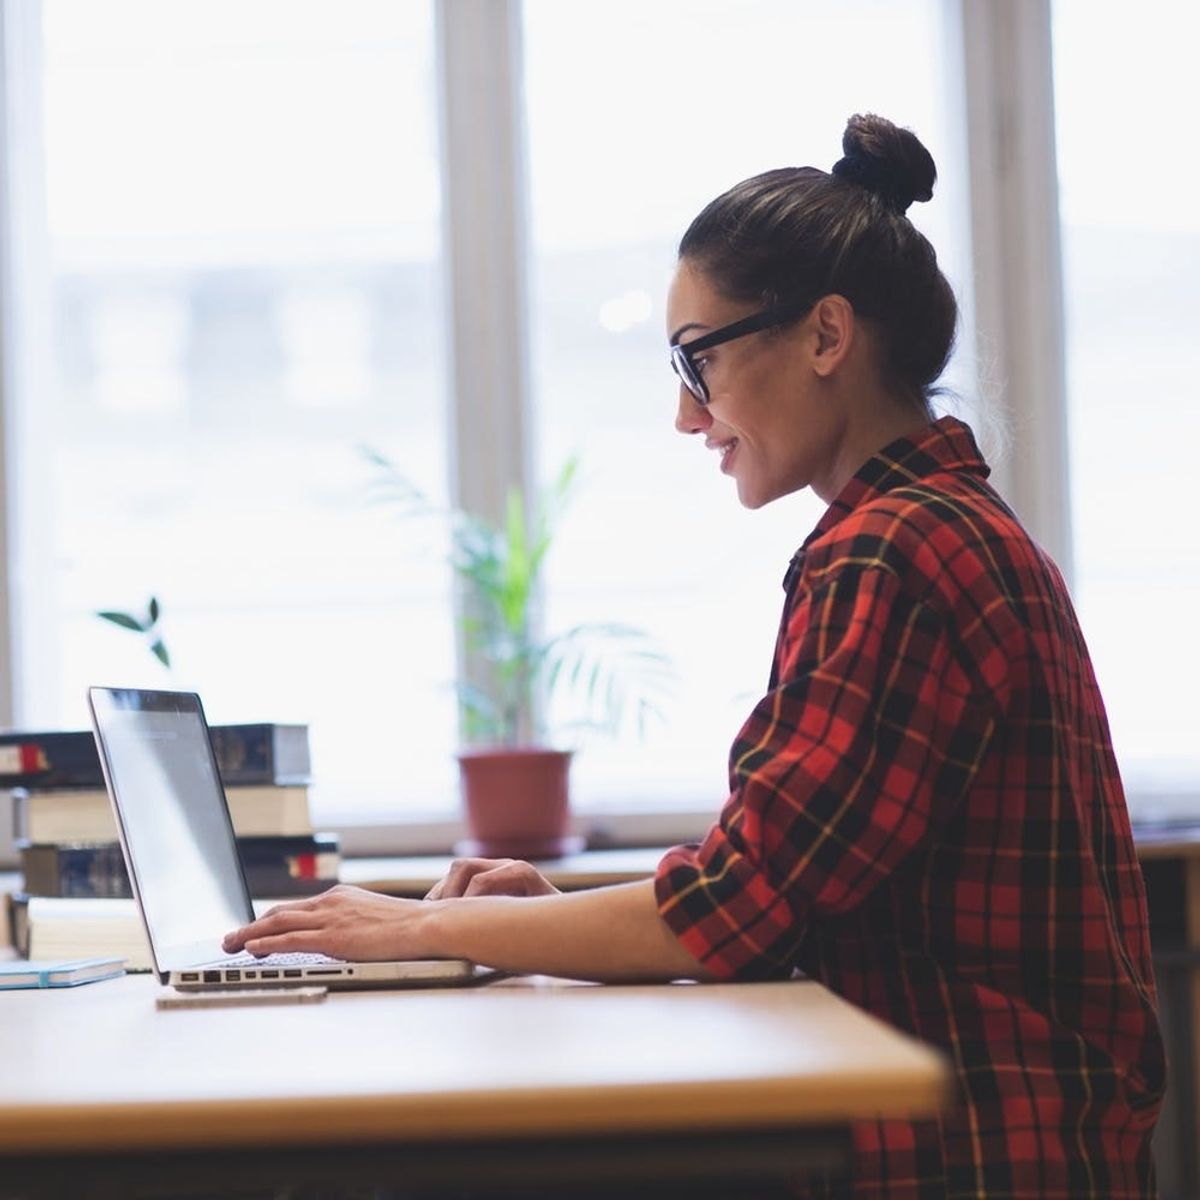 These 6 Free Online Programs to Help You Totally Change Careers